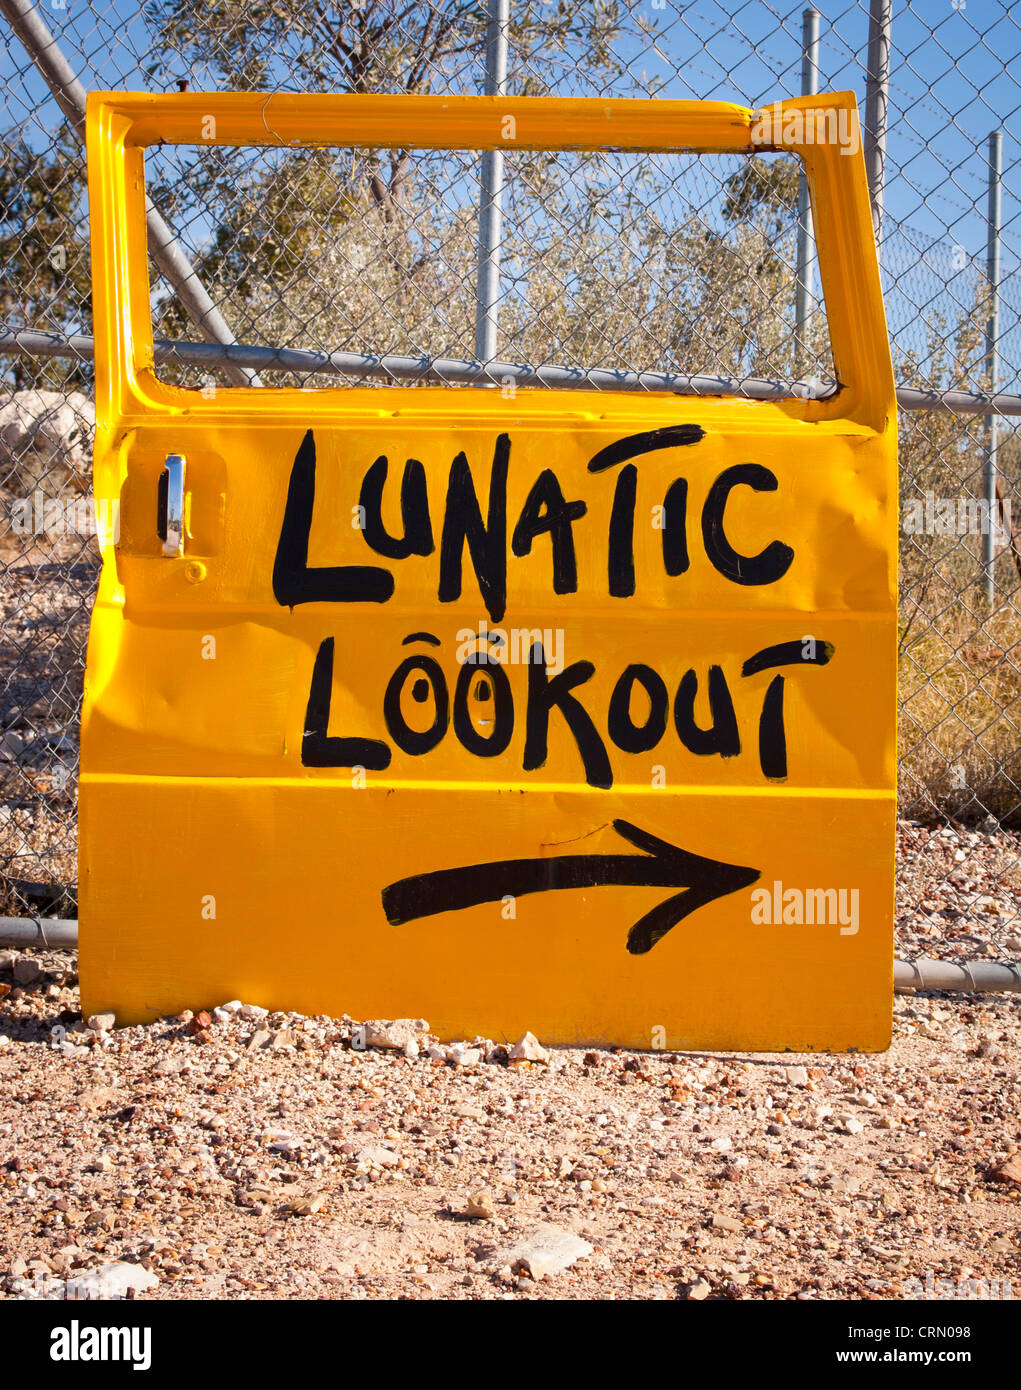 Classic Australian outback bush humour, with a car door pointing to Lunatic Lookout Stock Photo